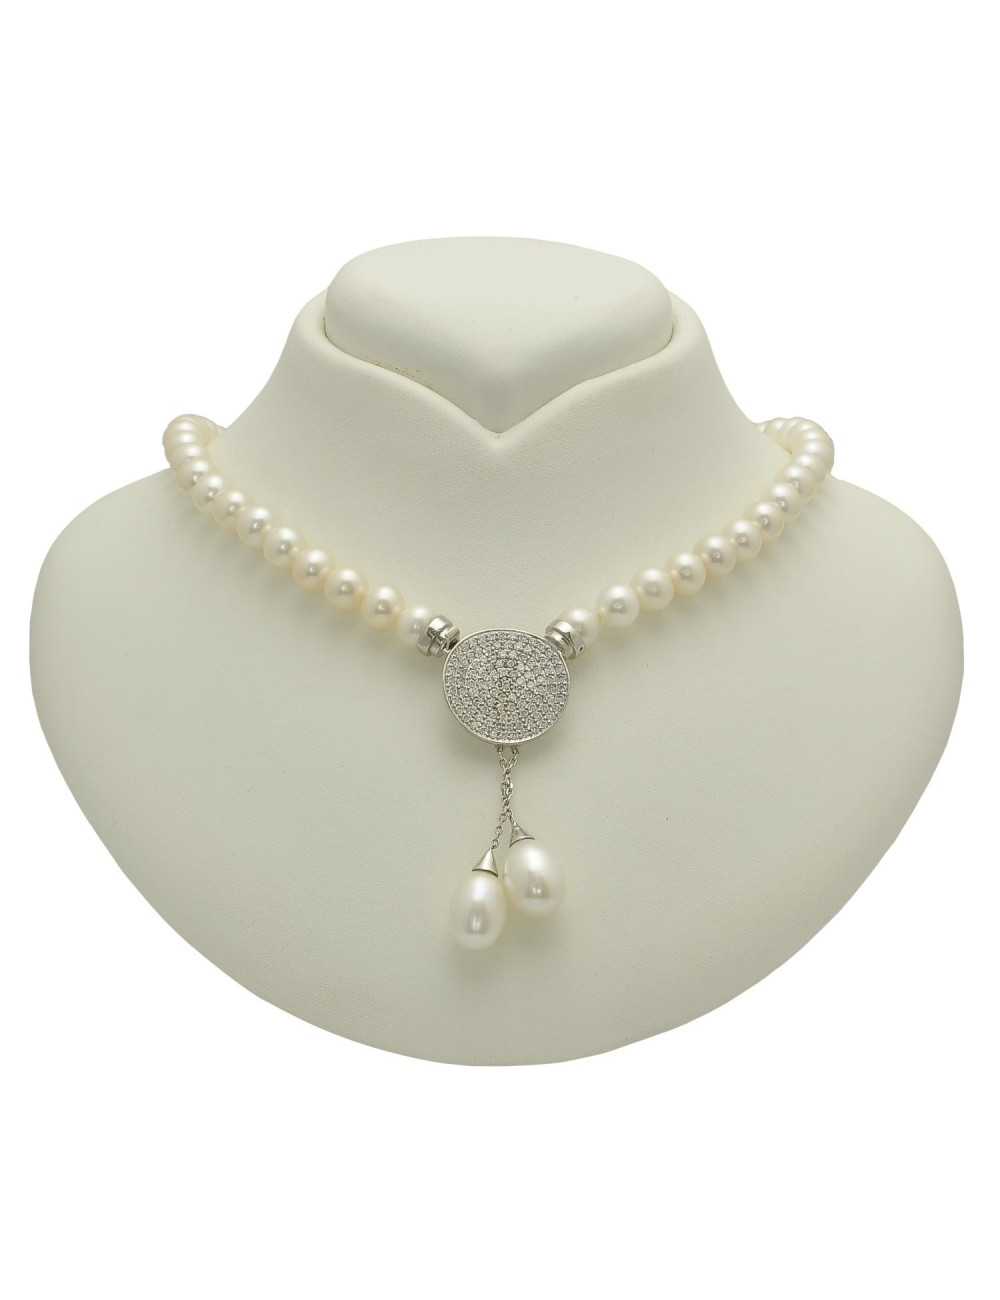 Pearl necklace with a circle filled with cubic zirconias, to which are attached chains with two teardrop-shaped pearls NO89GPCZ